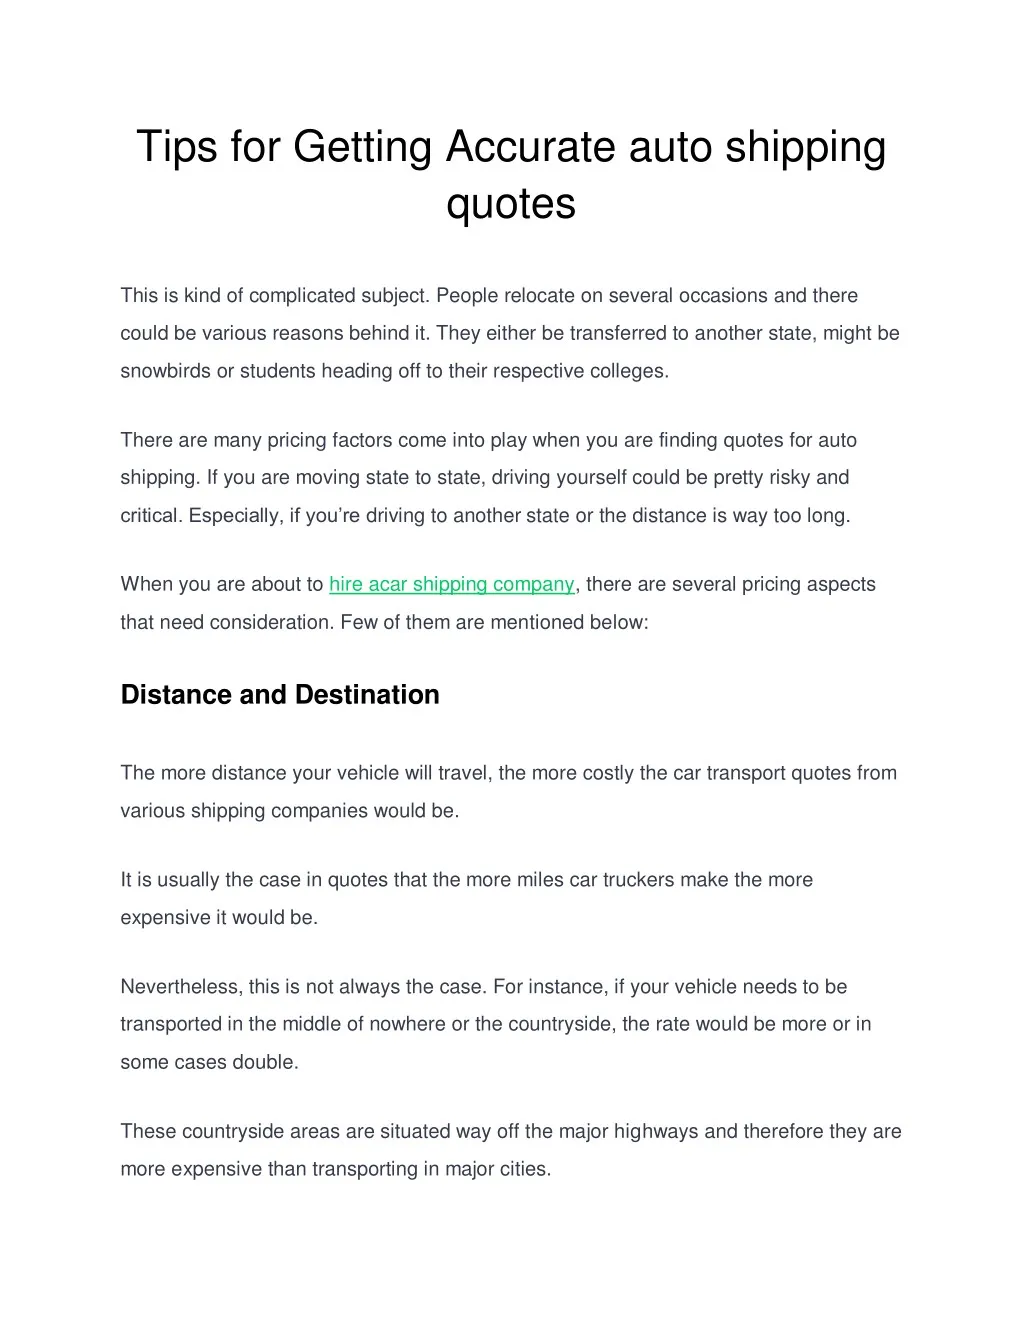 tips for getting accurate auto shipping quotes